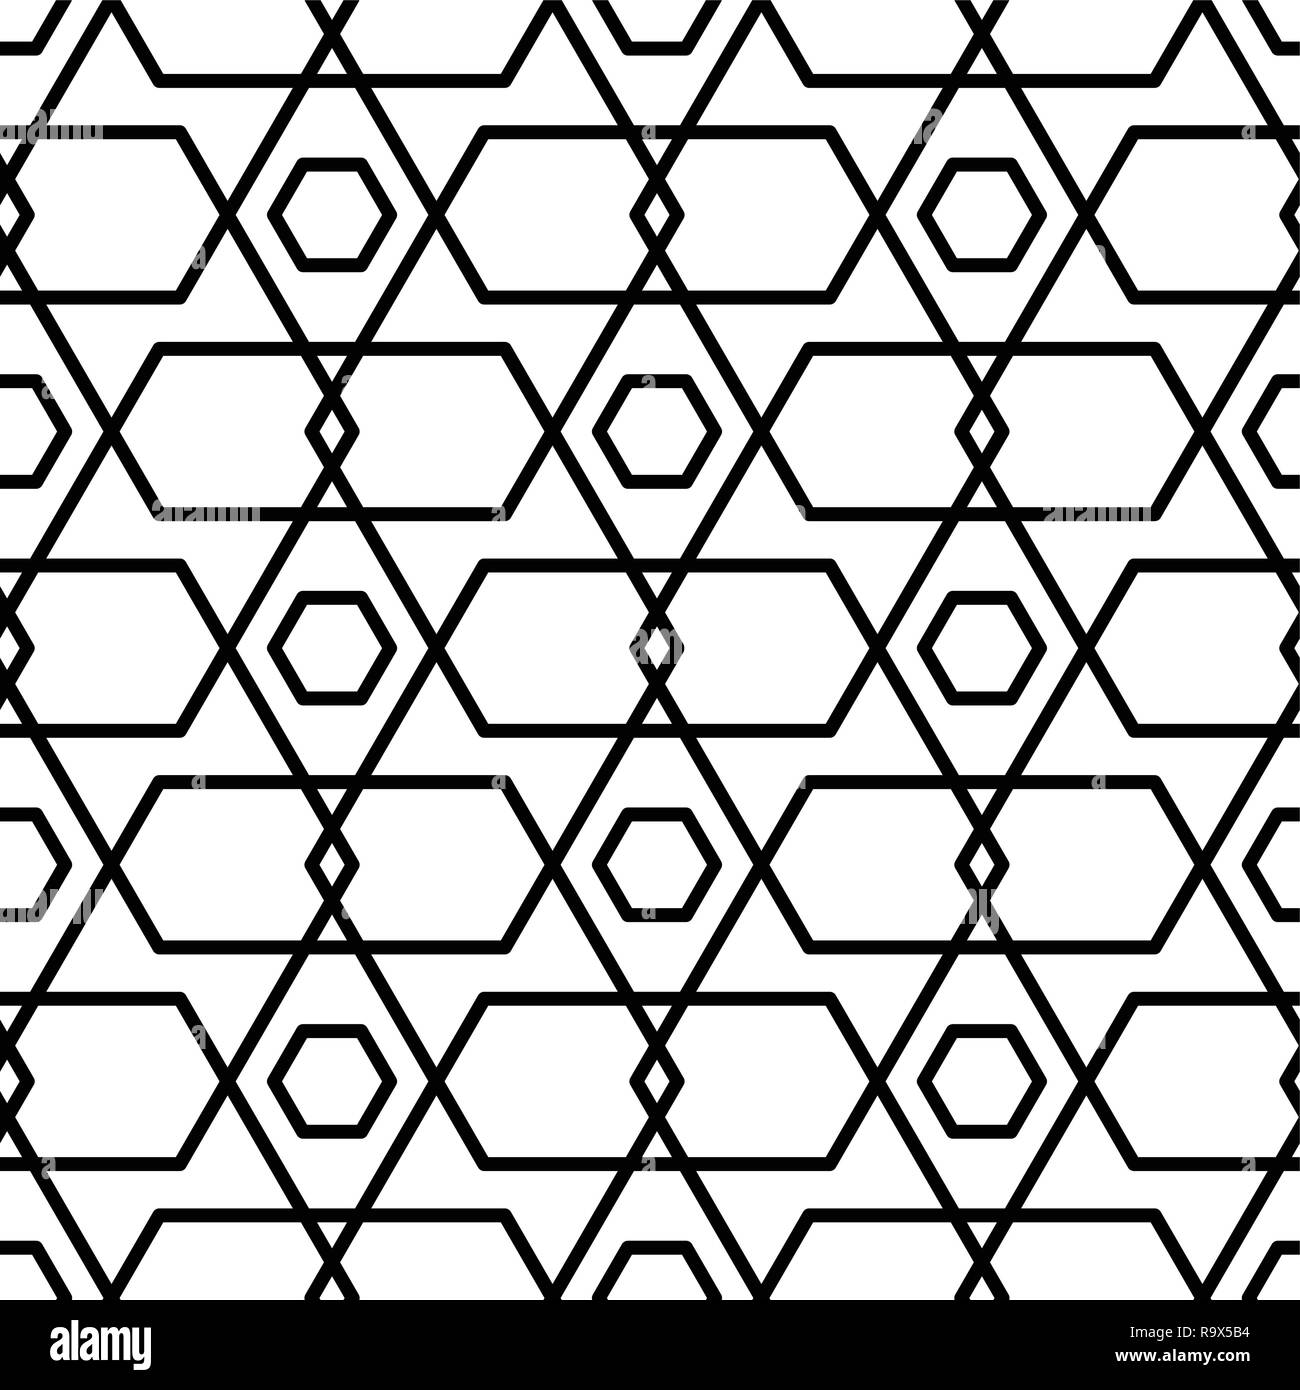 Vector geometric pattern in black and white style on a white background. Stock Vector